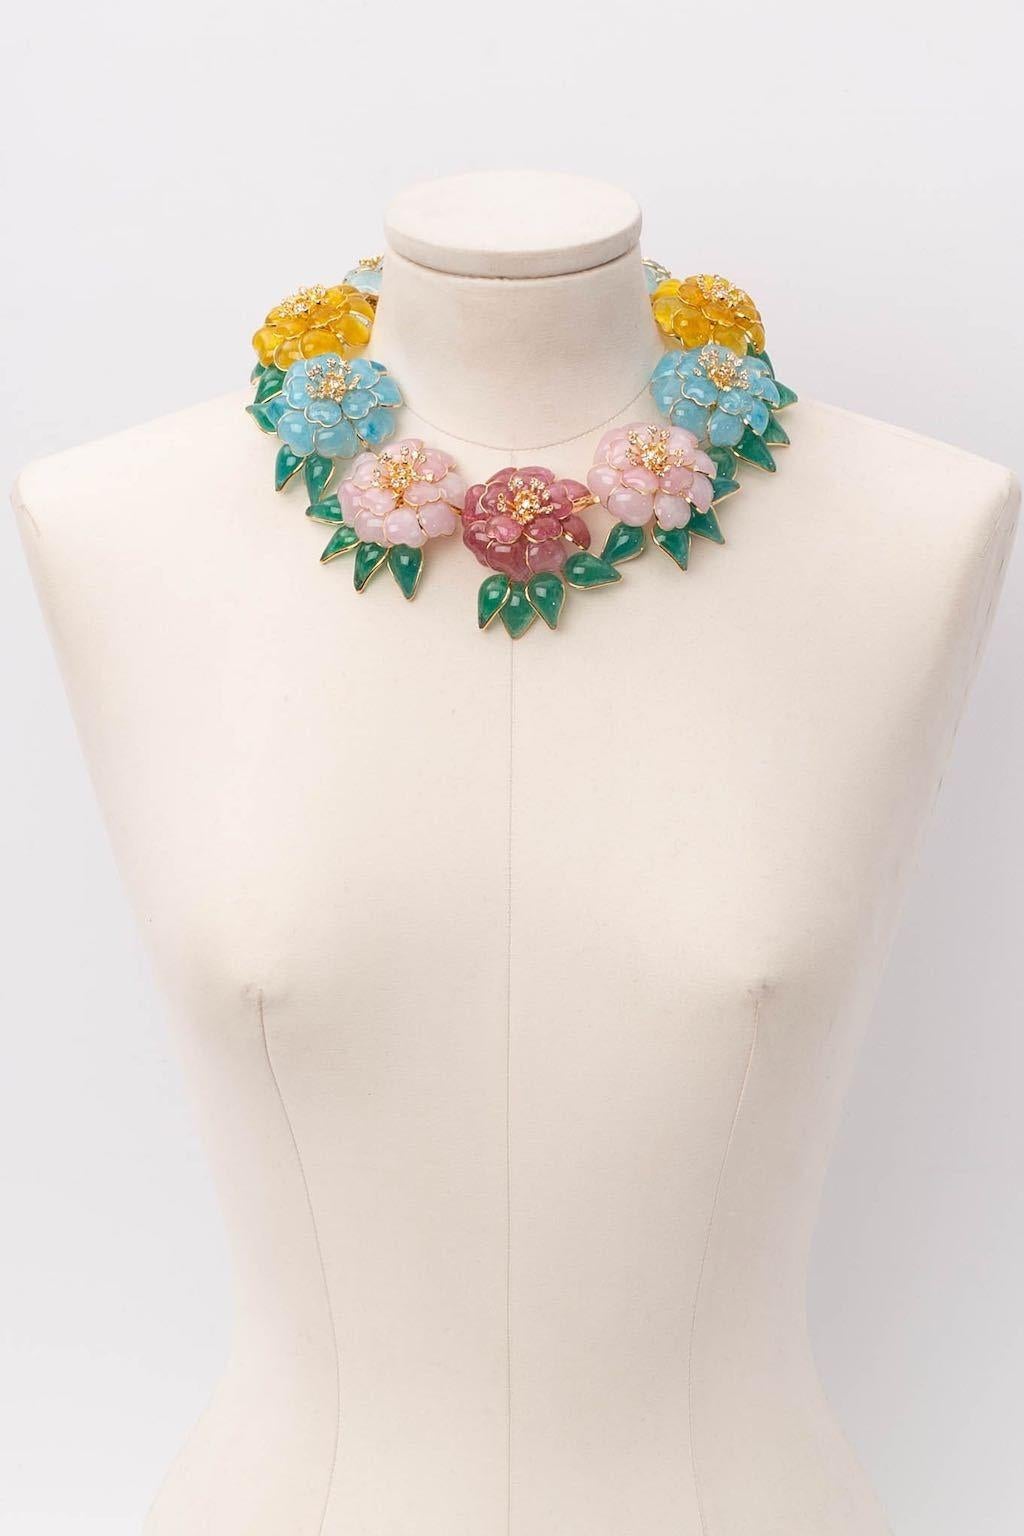 Augustine - Gilded metal choker composed of glass paste camellias in blue, yellow and pink colors and rhinestones.

Additional information:
Condition: Very good condition
Dimensions: Length: 41 cm to 47.5 cm (16.14